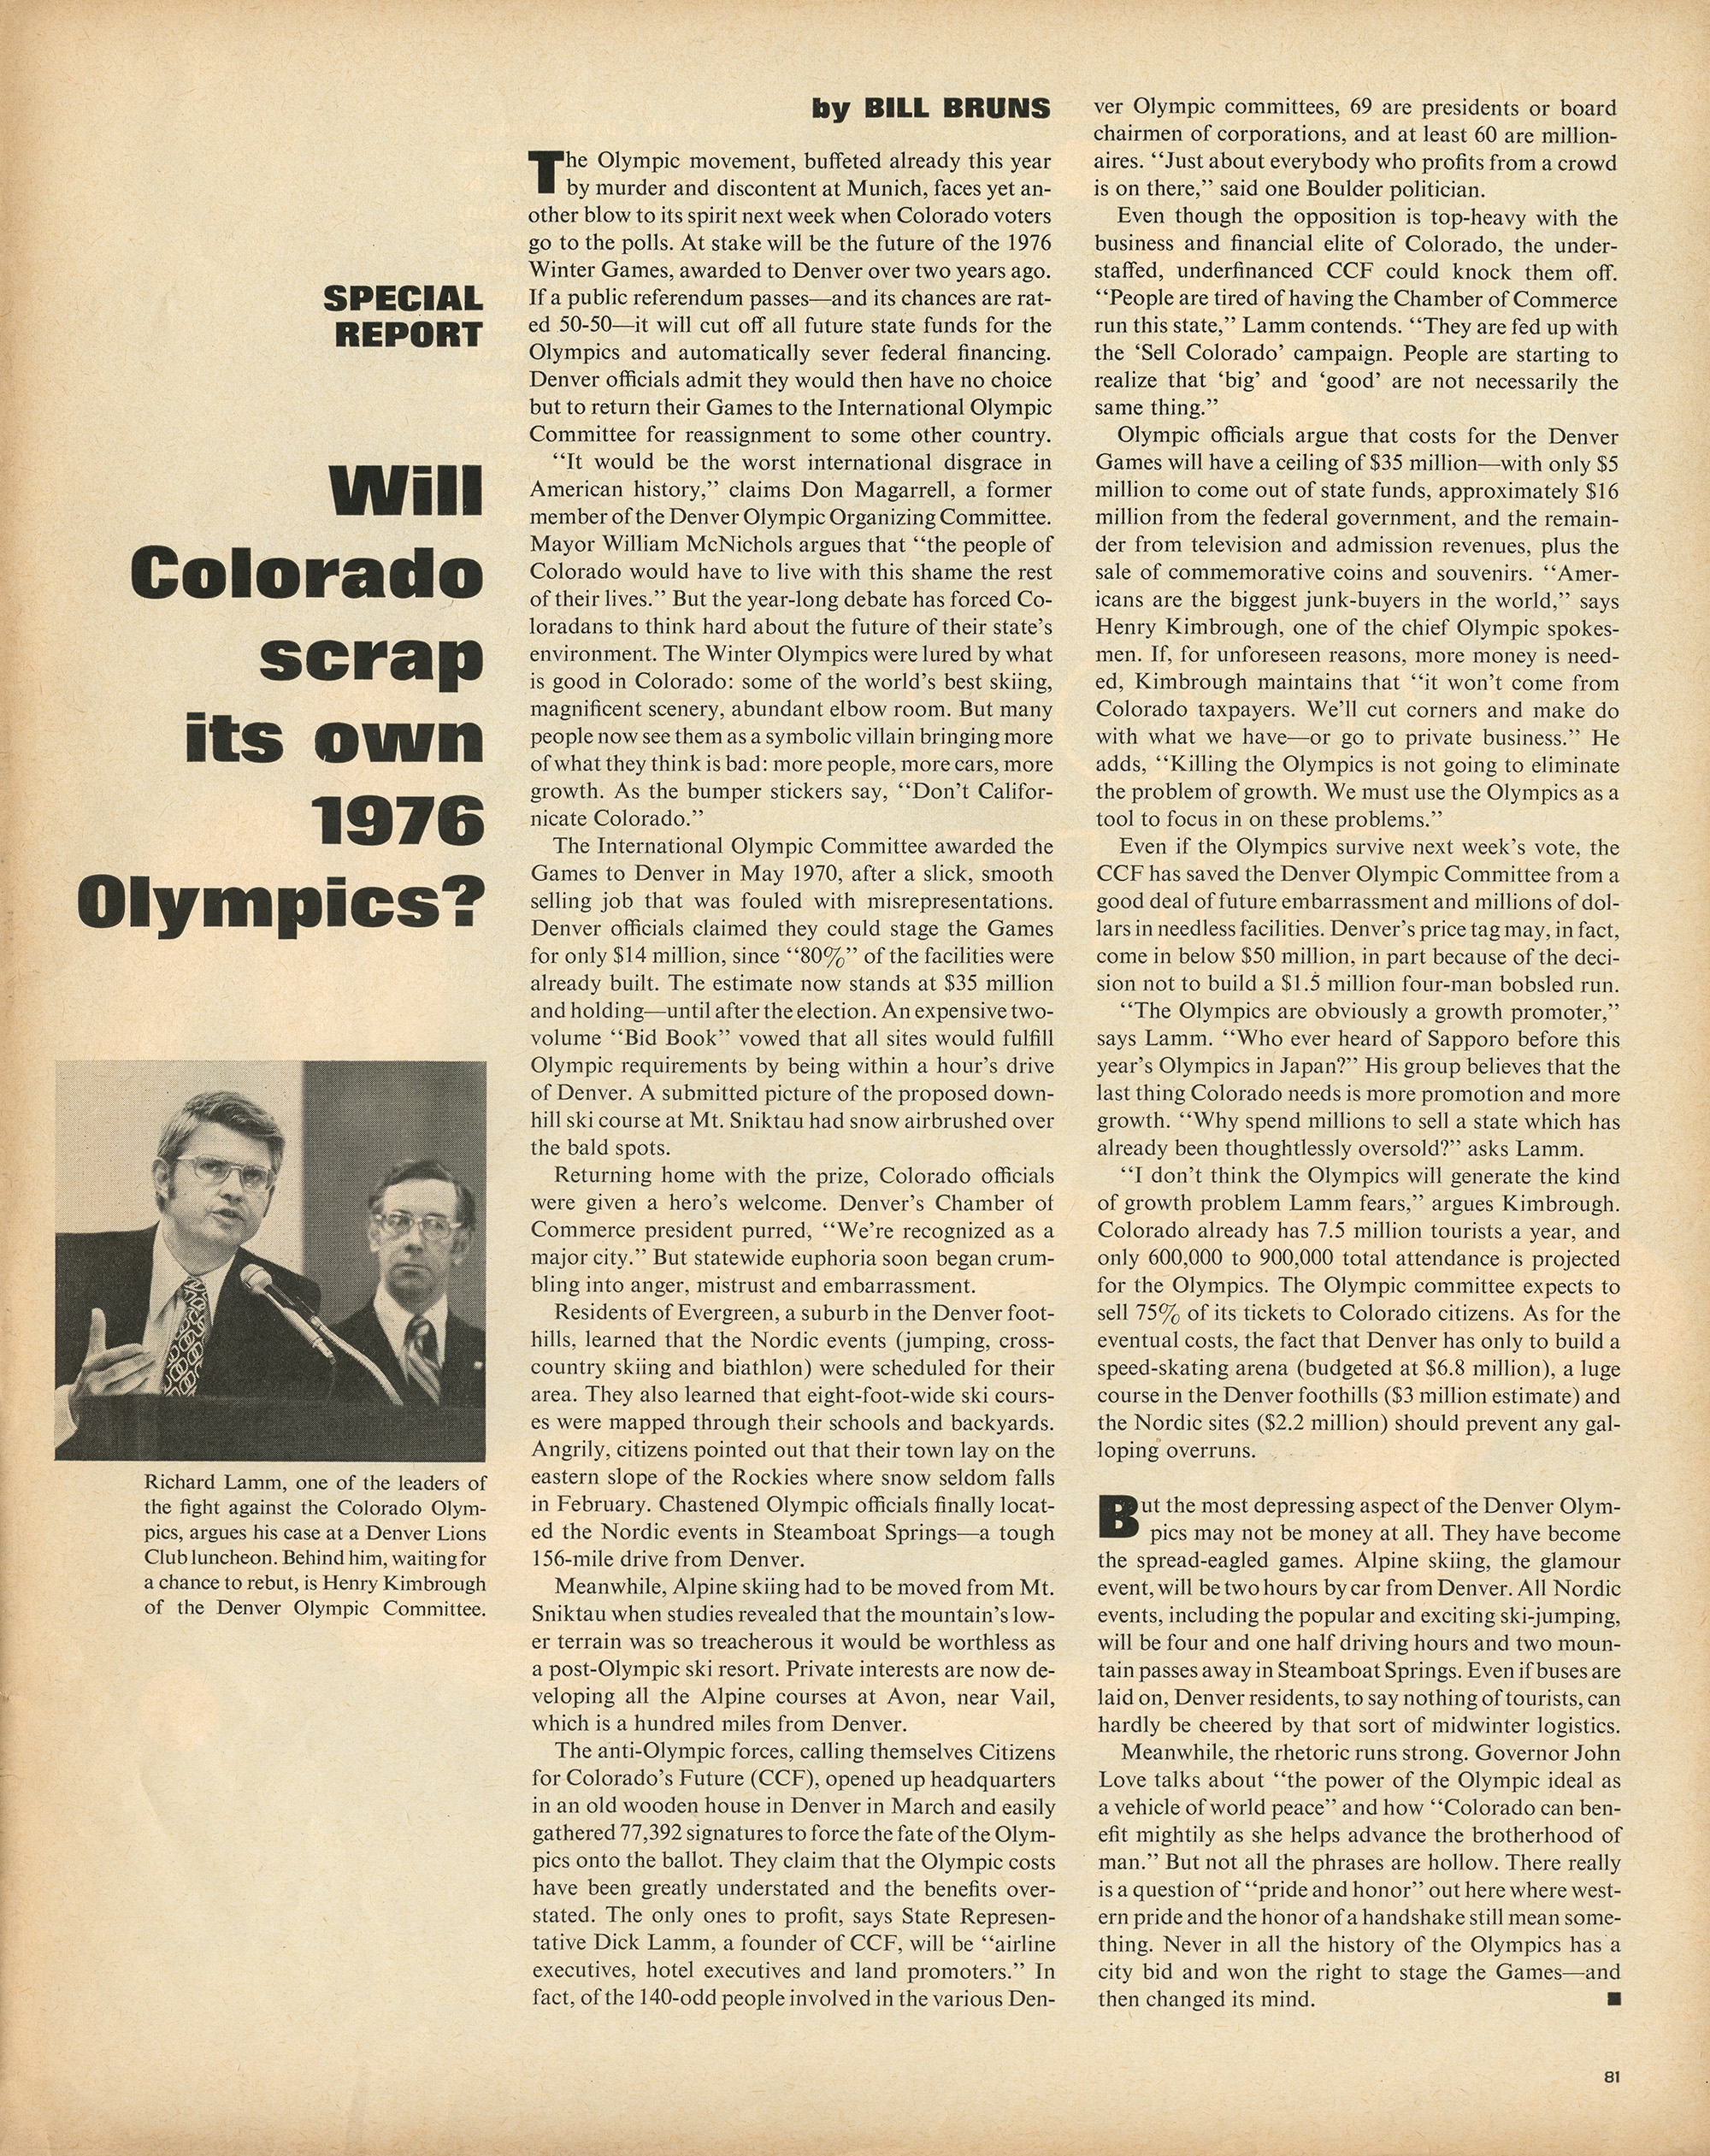 The debacle in Denver became national news as this Life magazine article published four days before the vote shows